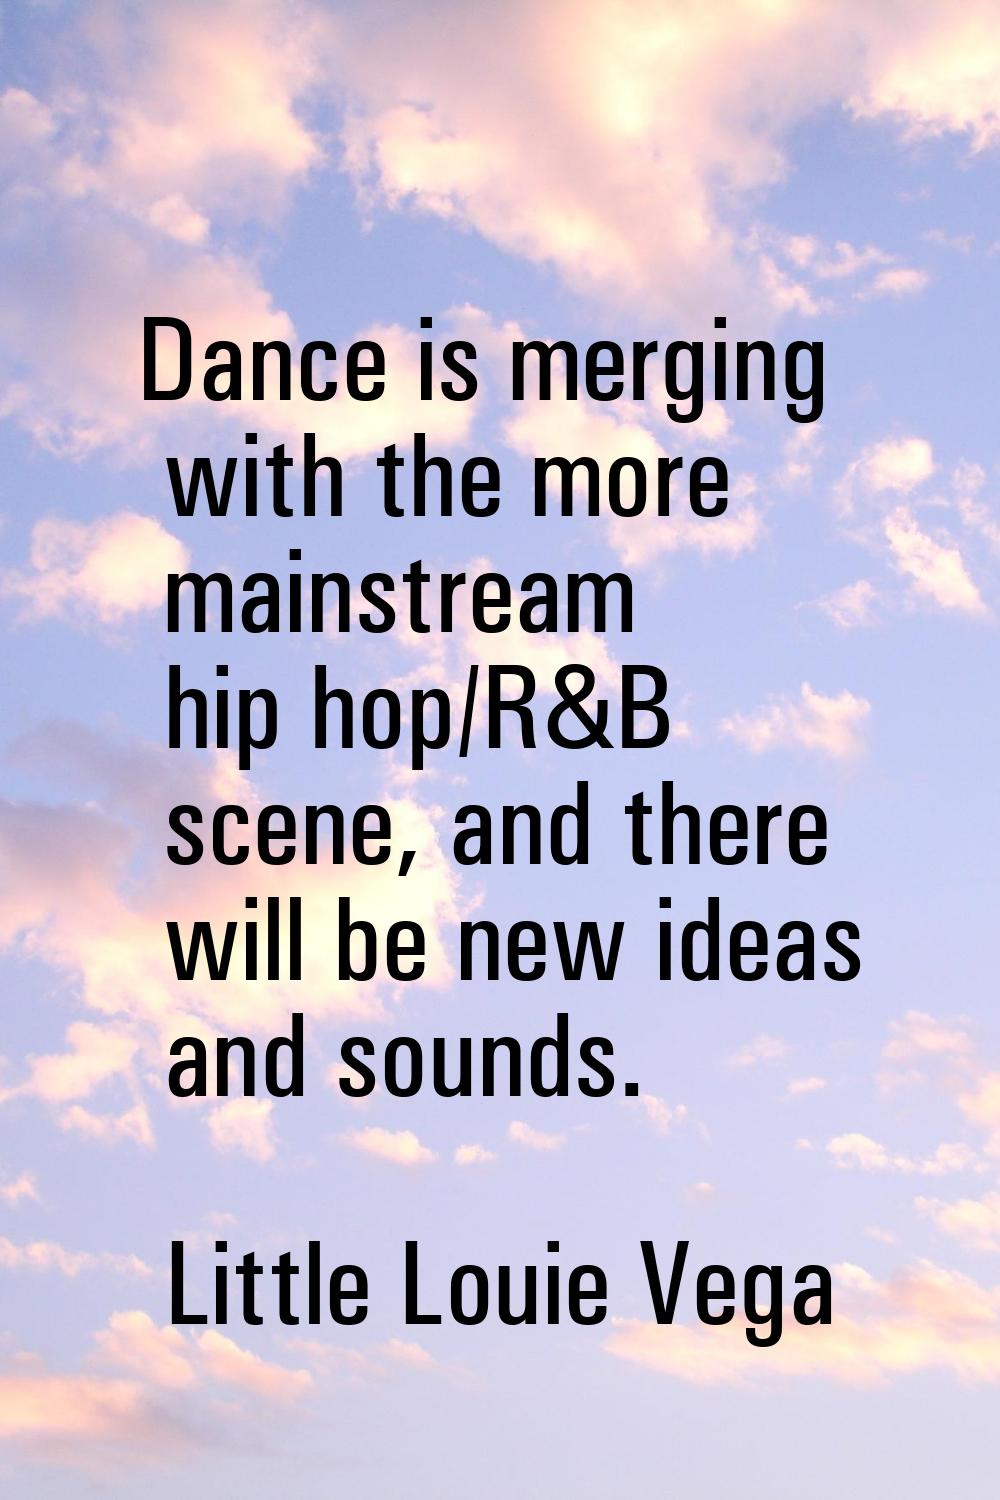 Dance is merging with the more mainstream hip hop/R&B scene, and there will be new ideas and sounds